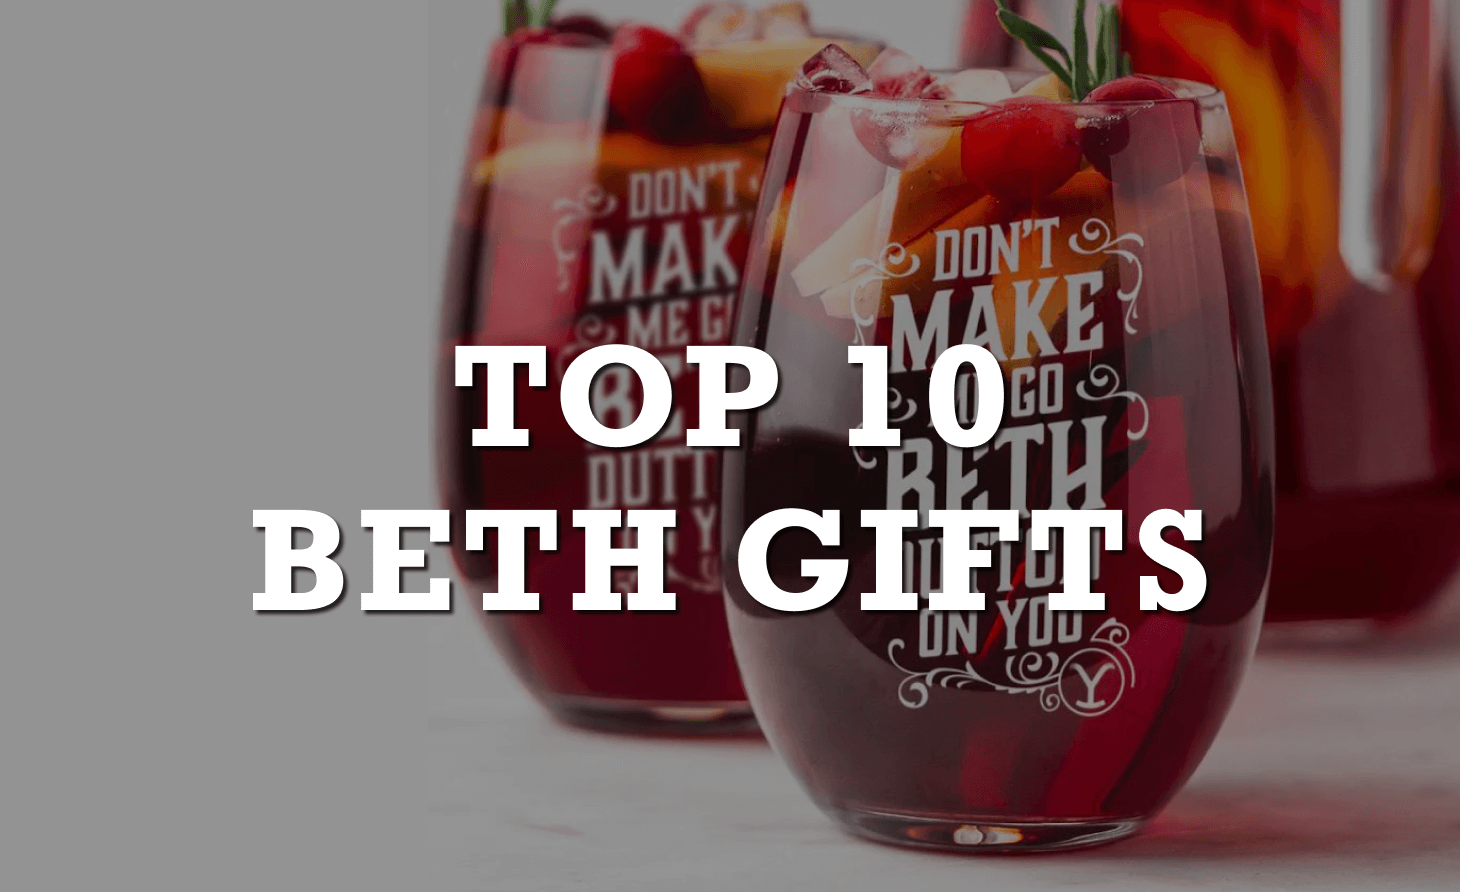 Top 10 Beth Dutton Gifts